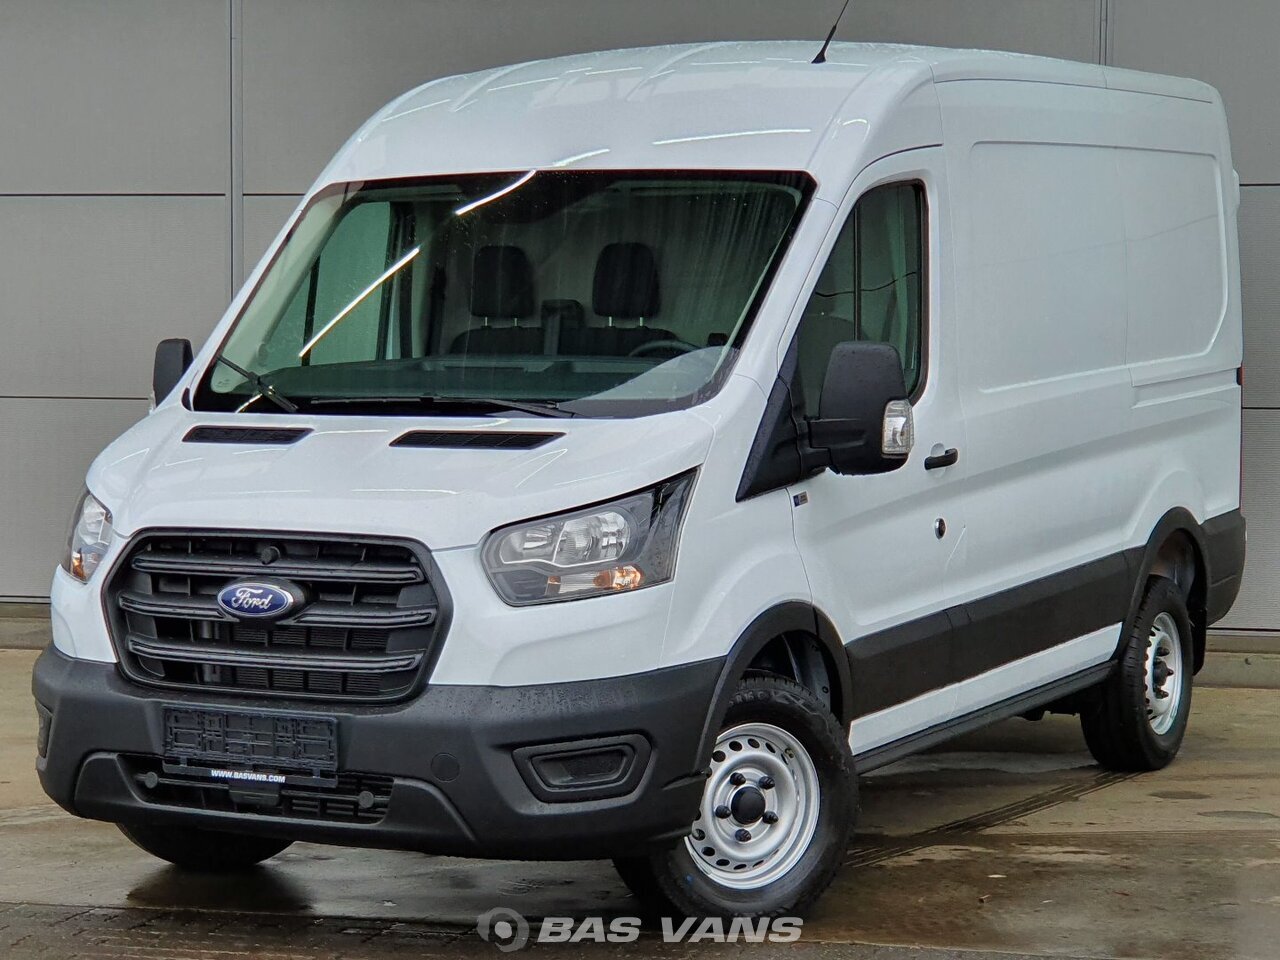 Ford 2019 Closed van Light commercial 